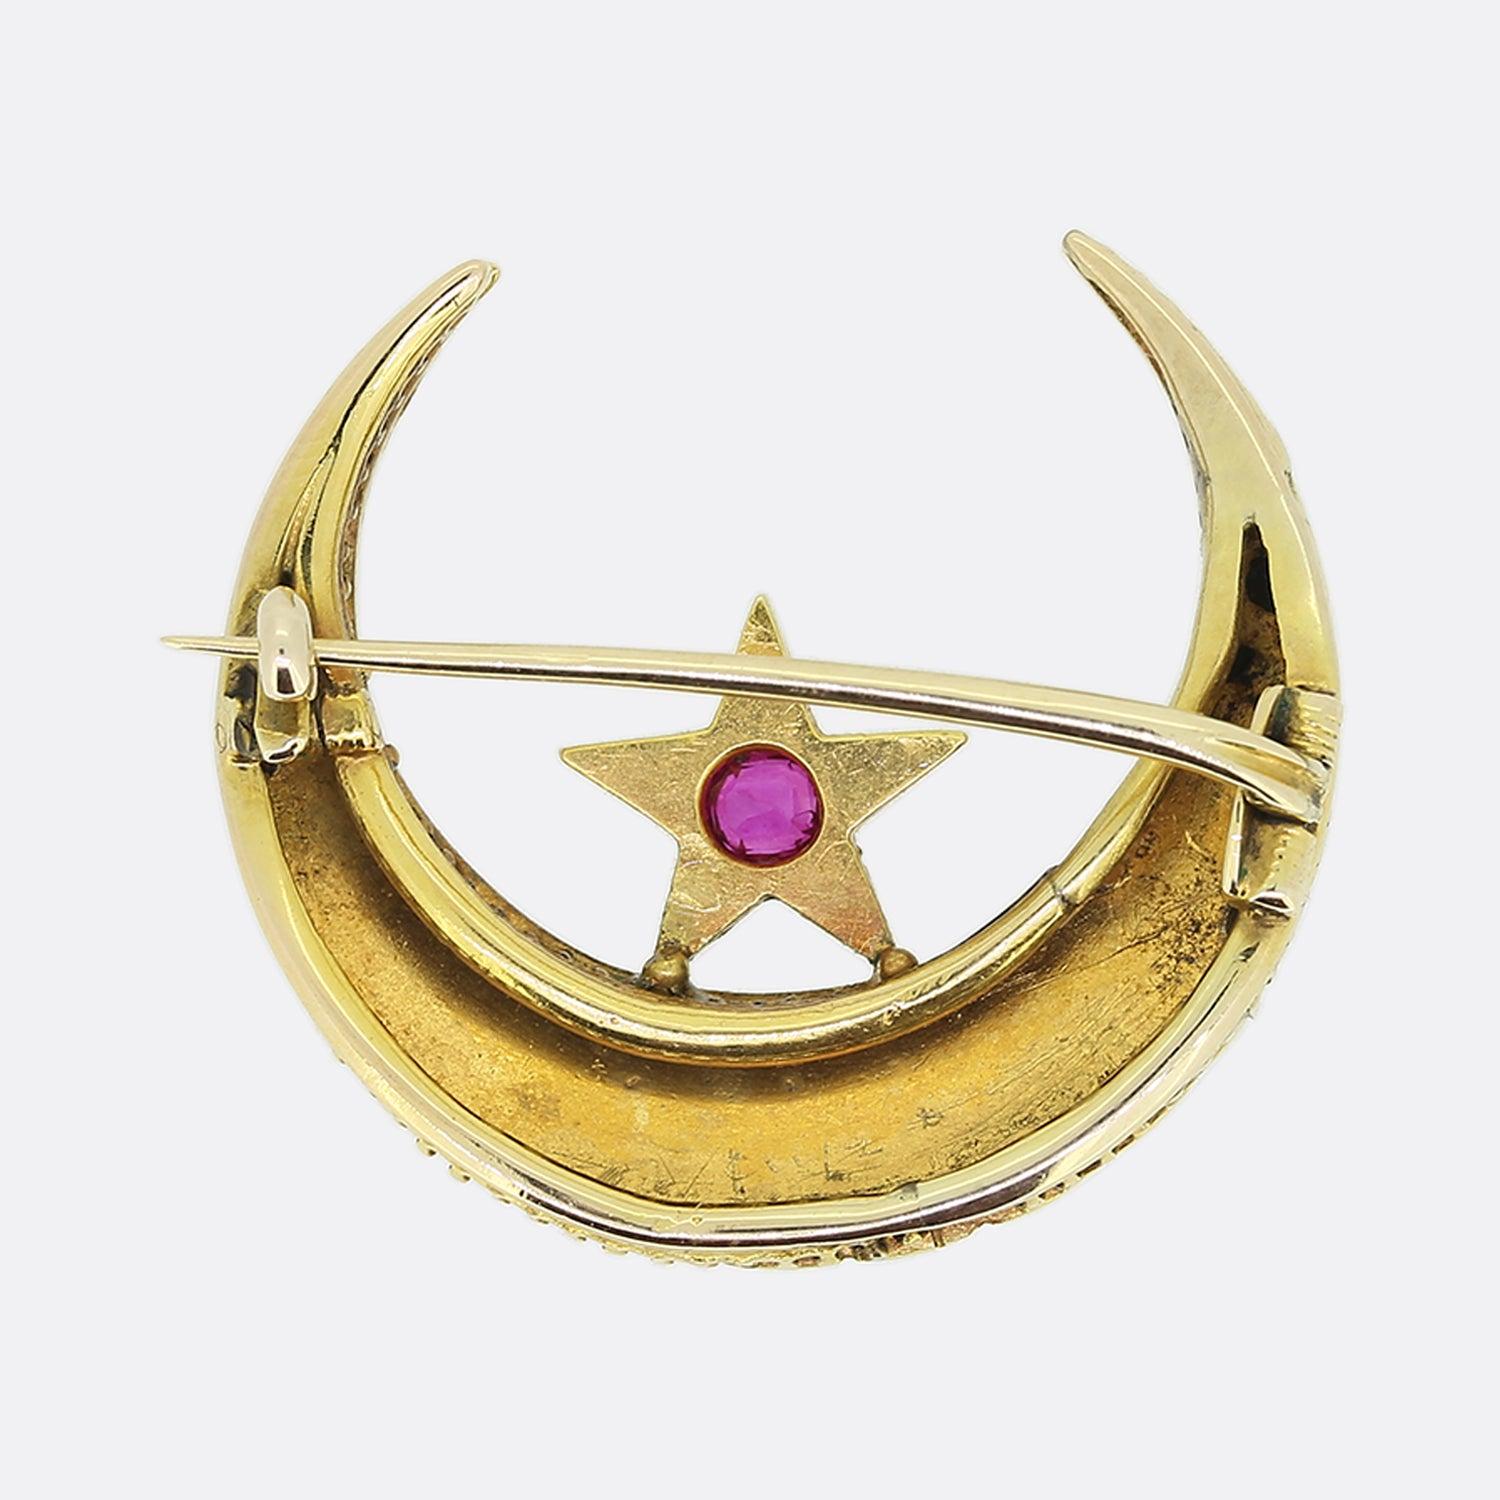 This is a wonderful antique ruby, diamond and pearl crescent brooch. Crafted in 15ct yellow gold during the late Victorian era, the focal aspect of this brooch is the centralised star set ruby surrounded by a quintuplet of rose cut diamonds. The